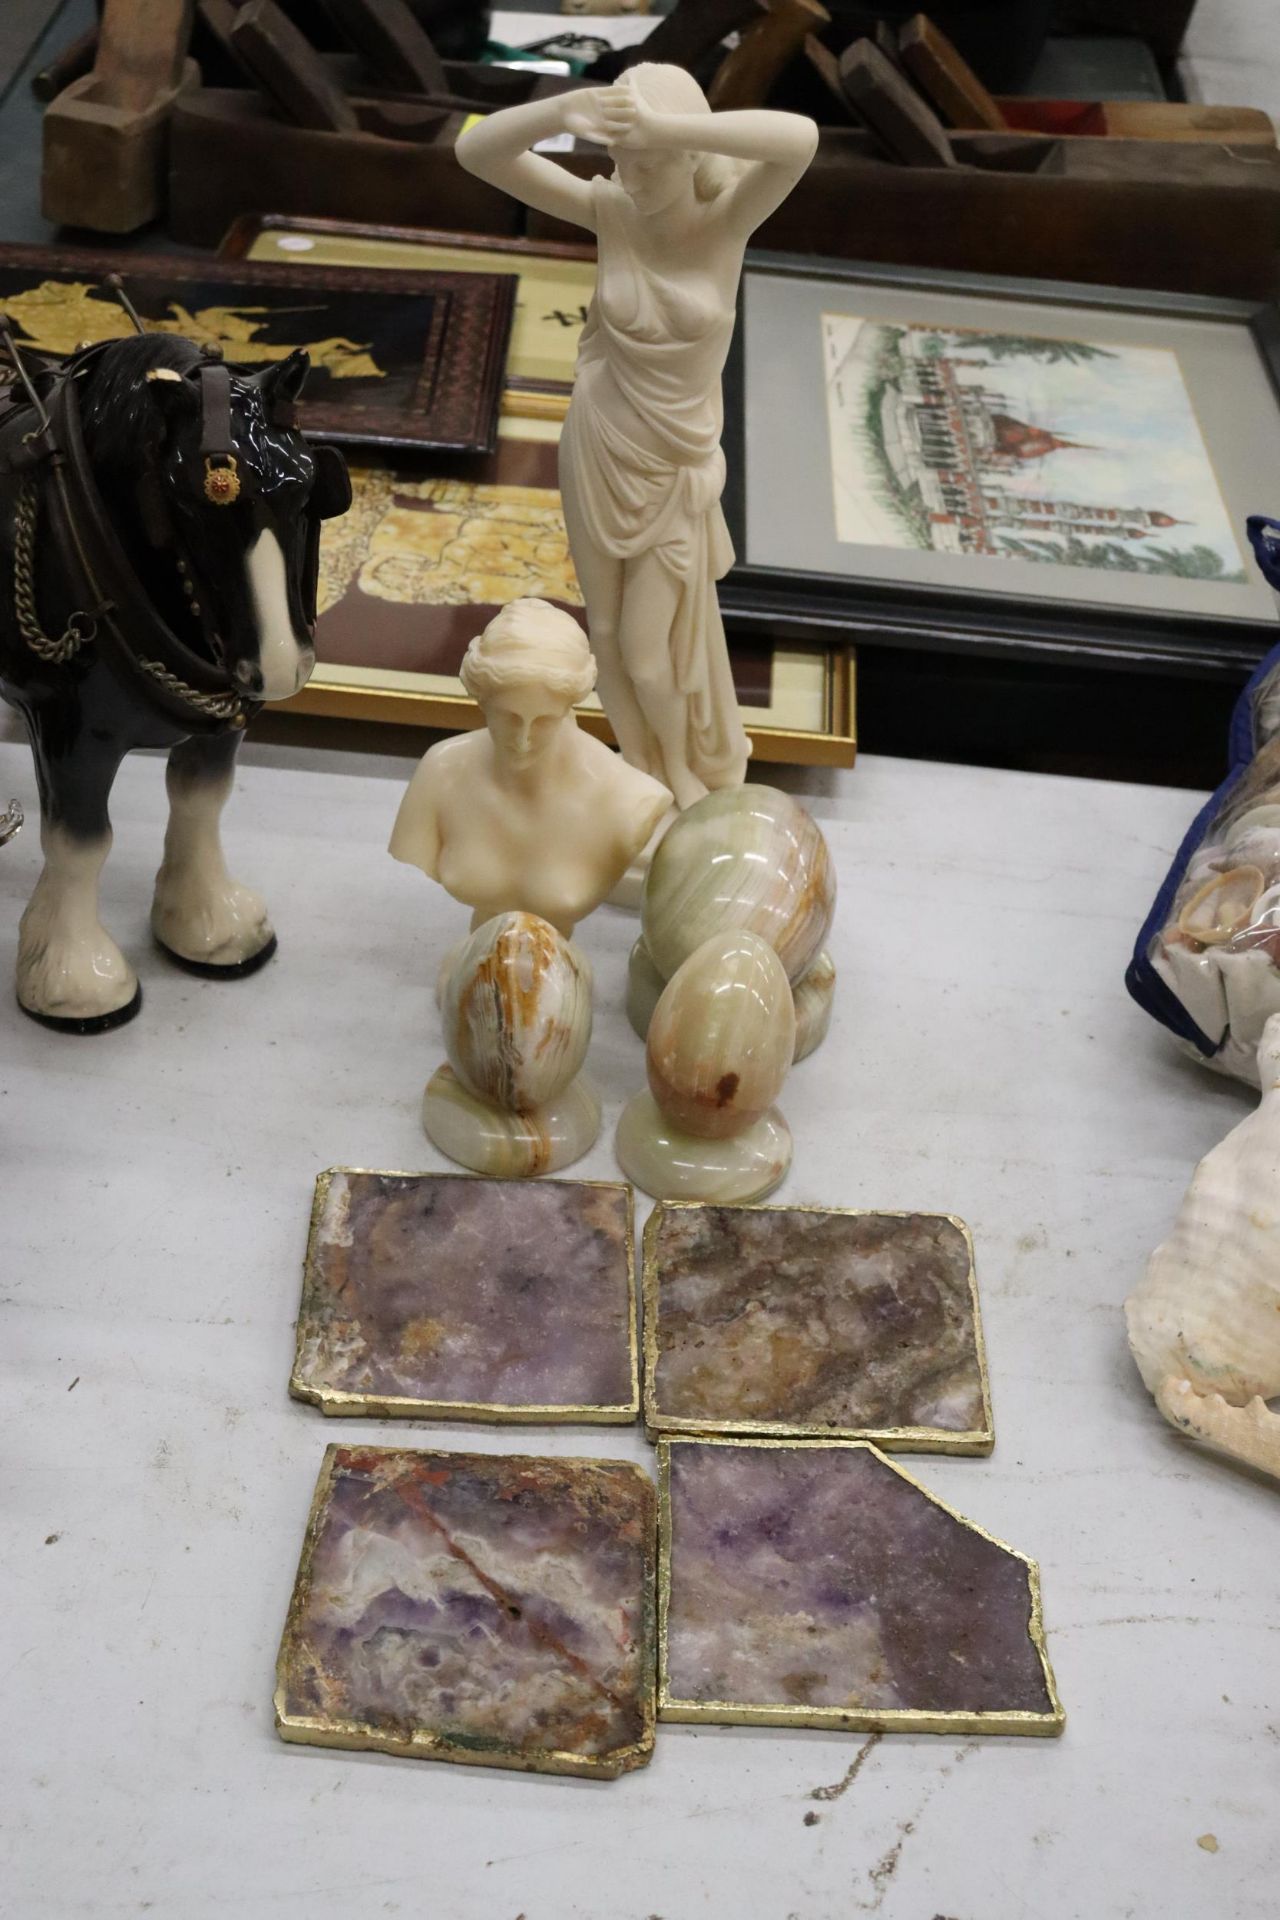 TWO CLASSICAL FIGURES, ONYX EGGS AND COASTERS